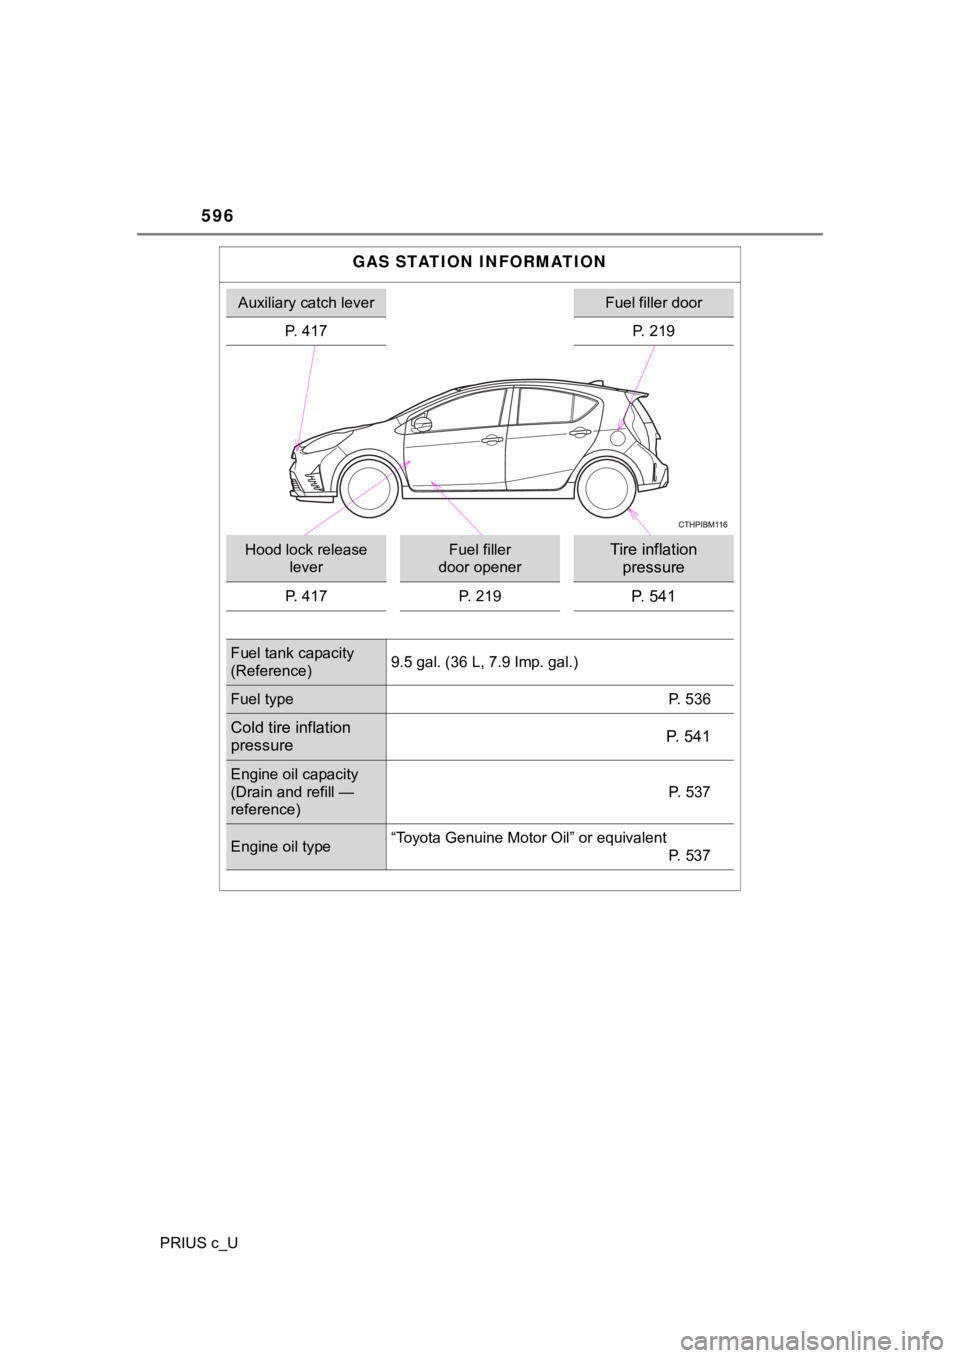 TOYOTA PRIUS C 2019  Owners Manual (in English) 596
PRIUS c_U
GAS STATION INFORMATION
Auxiliary catch leverFuel filler door
P. 417 P. 219
Hood lock release  leverFuel filler 
door openerTire inflation  pressure
P. 417 P. 219P. 541
Fuel tank capacit